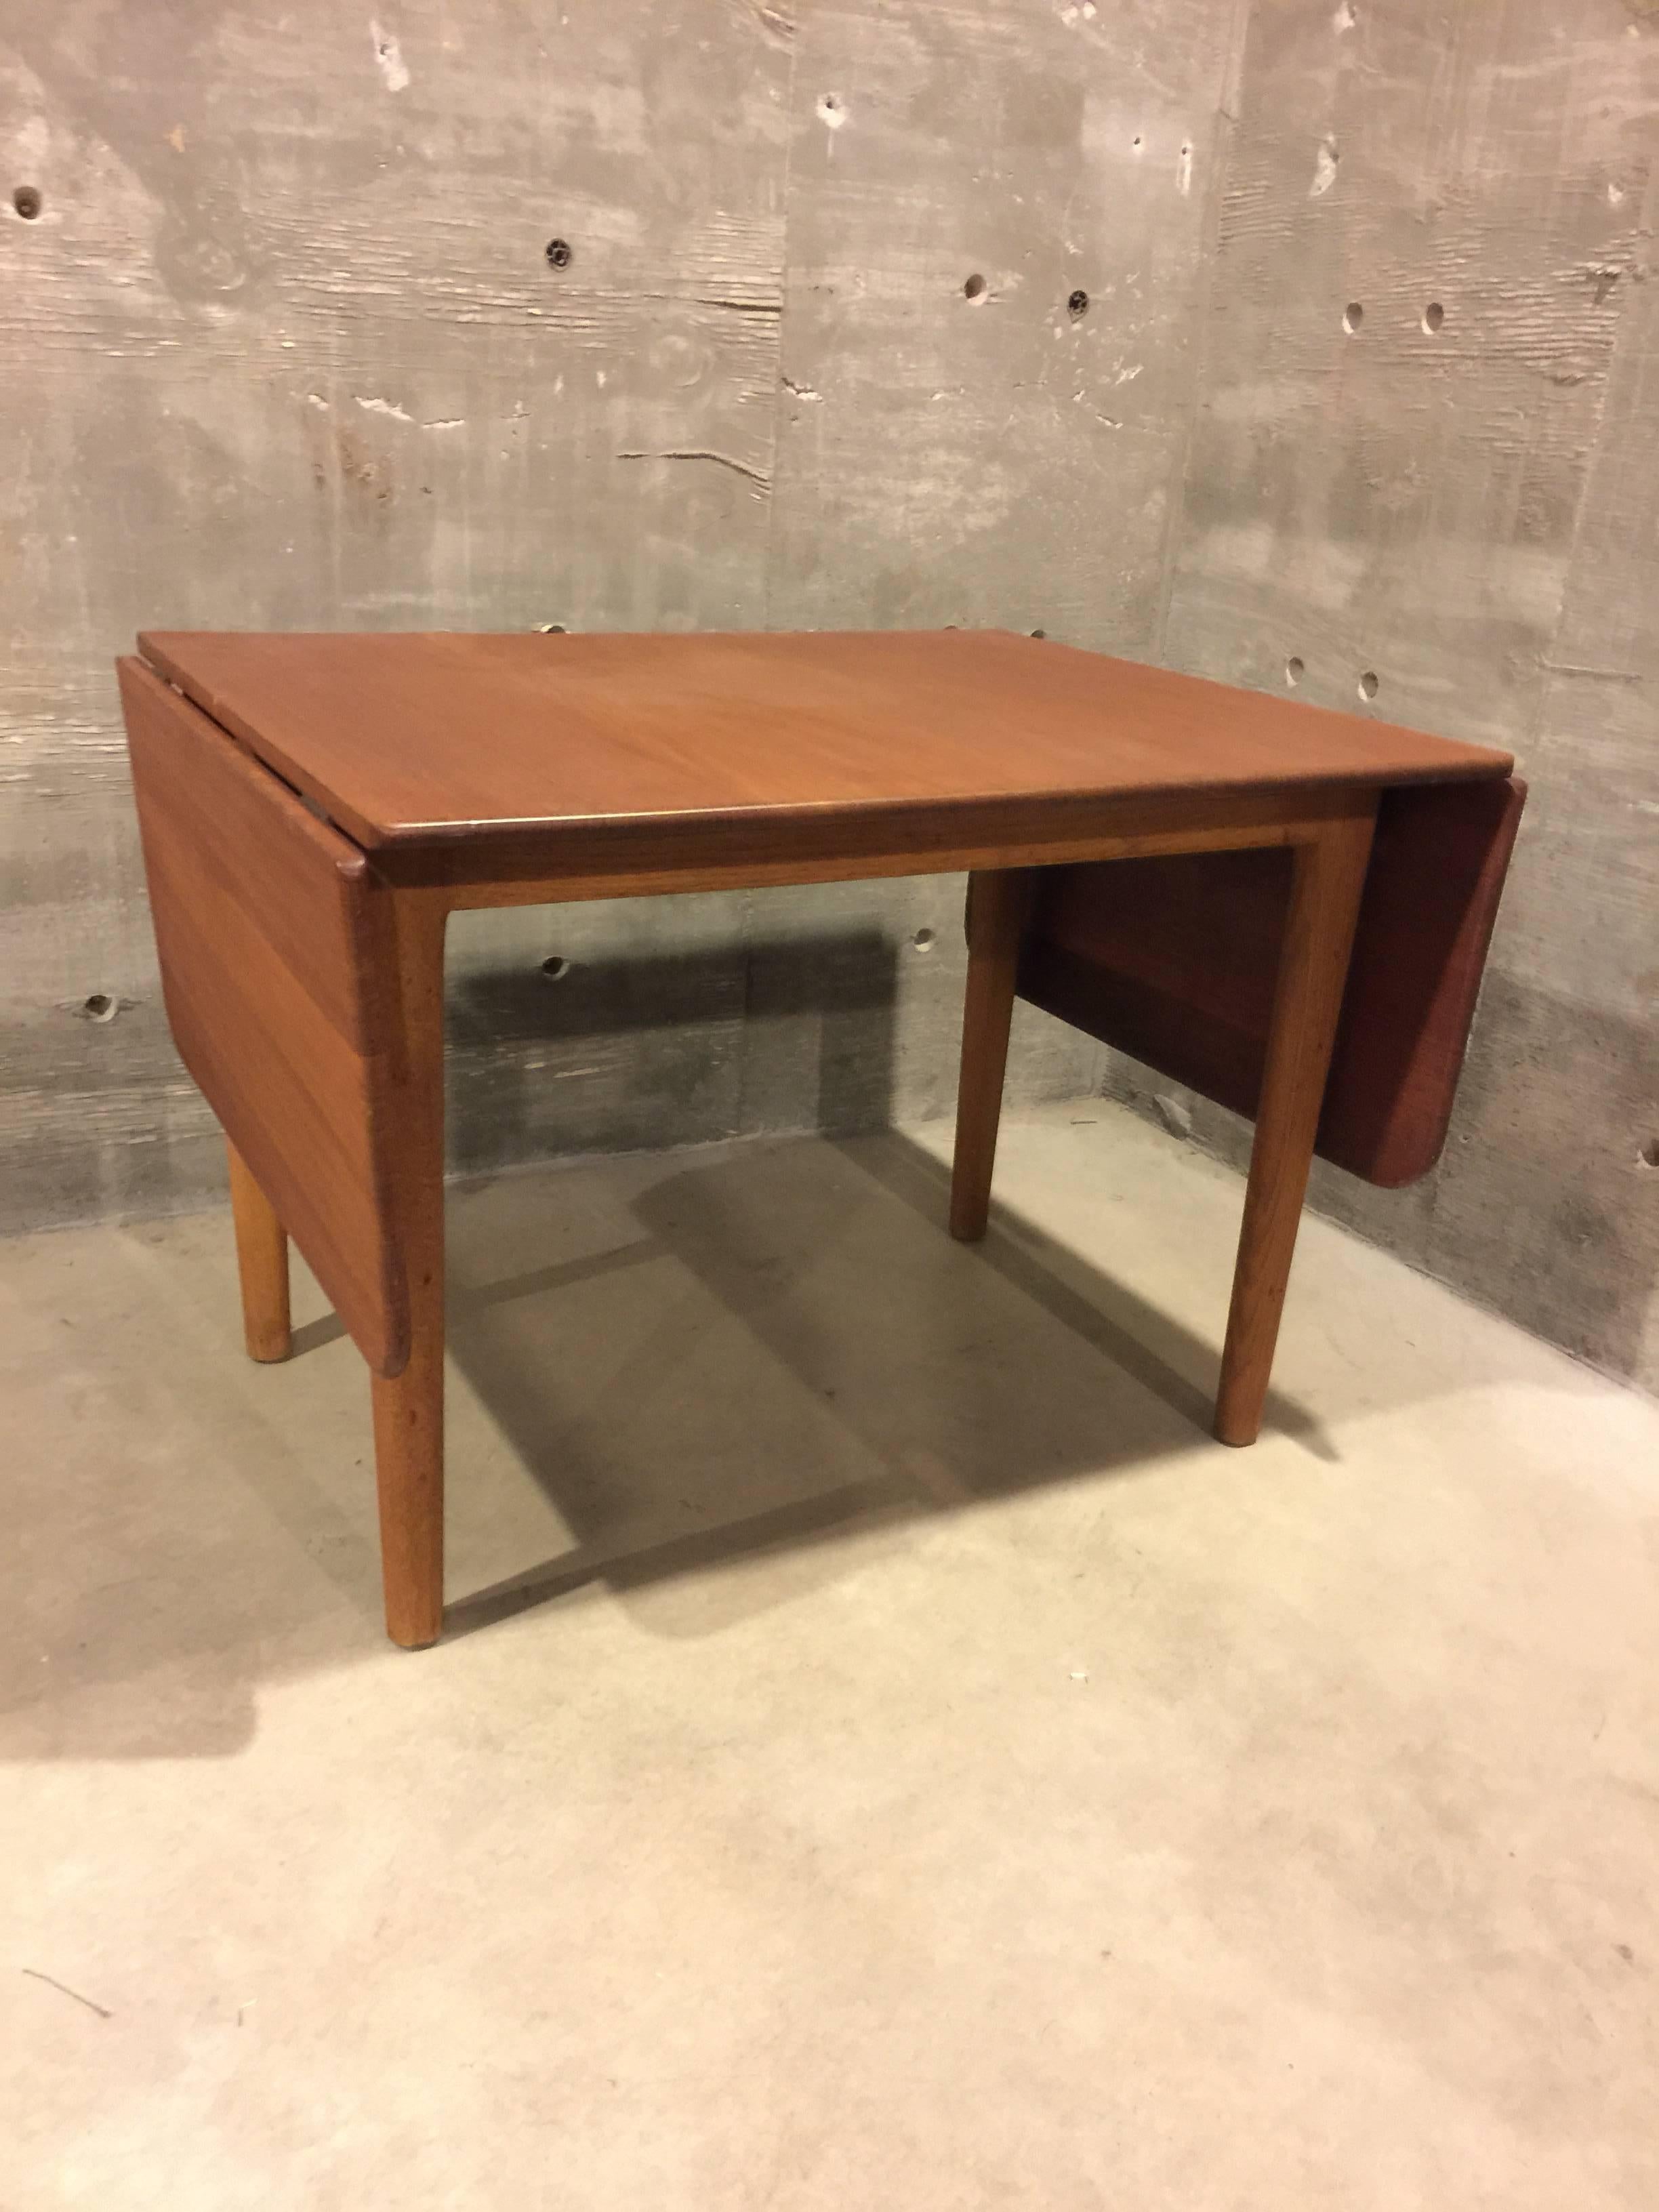 Beautiful drop-leaf table by Hans Wegner
This is an earlier design produced by Johannes Hansen and is marked
Expands to 52.5